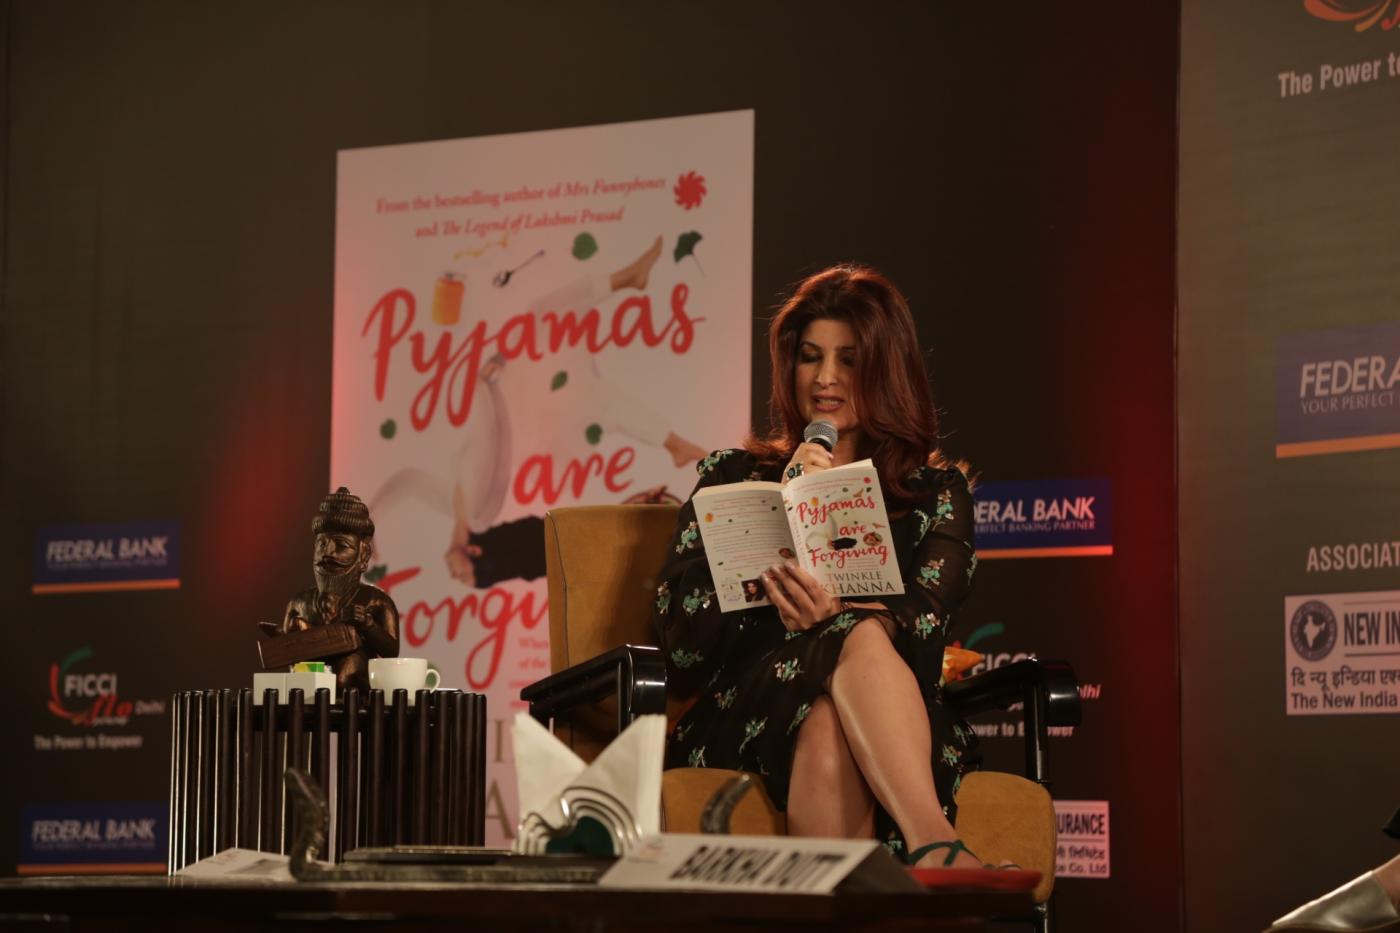 New Delhi: Actor-turned-author Twinkle Khanna attends a FICCI YFLO session "Pyjamas are Forgiving" in New Delhi on Sept 19, 2018. (Photo: Amlan Paliwal/IANS) by .